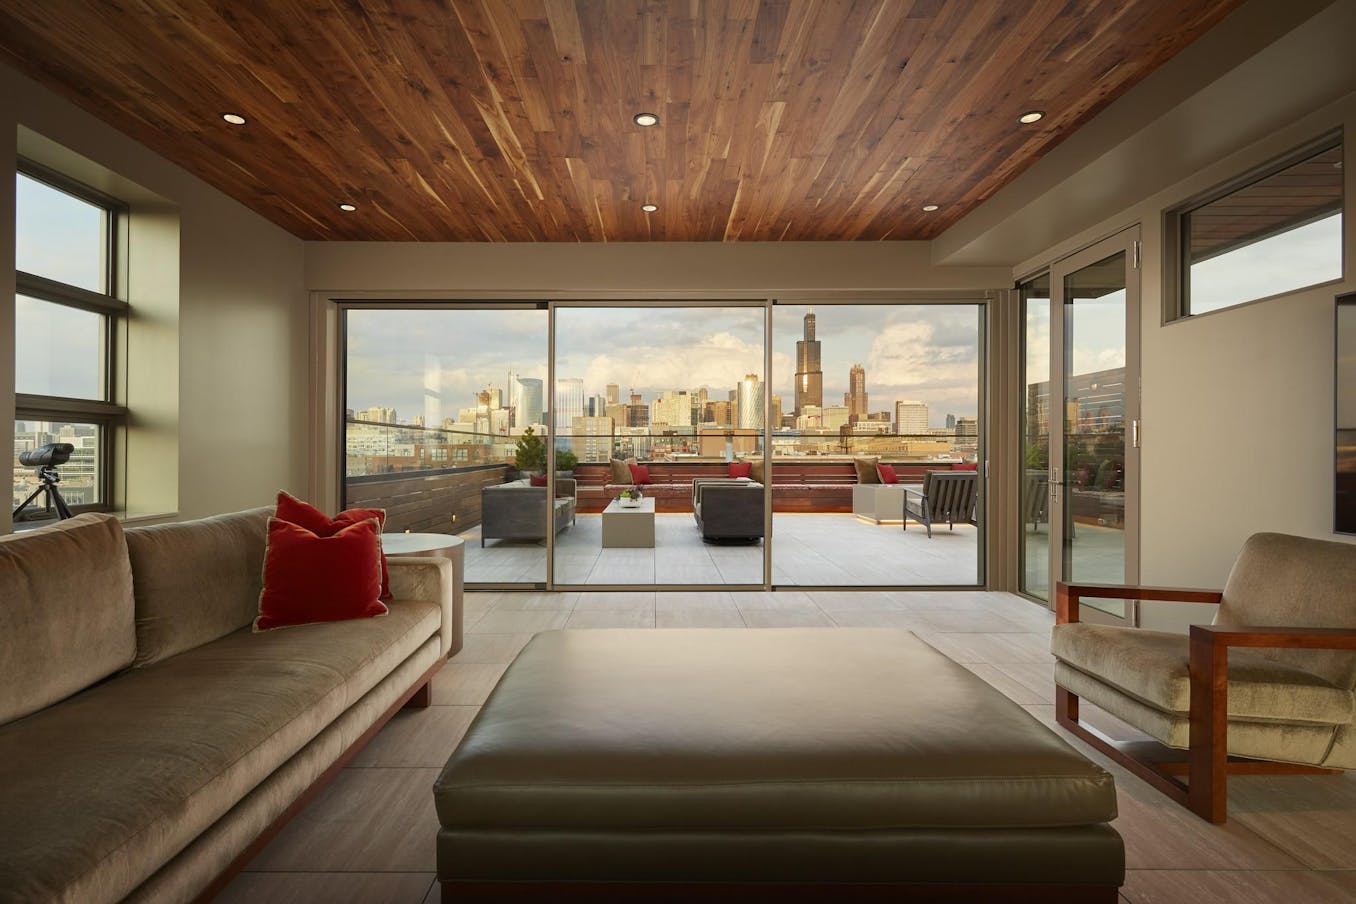 A living room with minimal glass walls and a view of the city